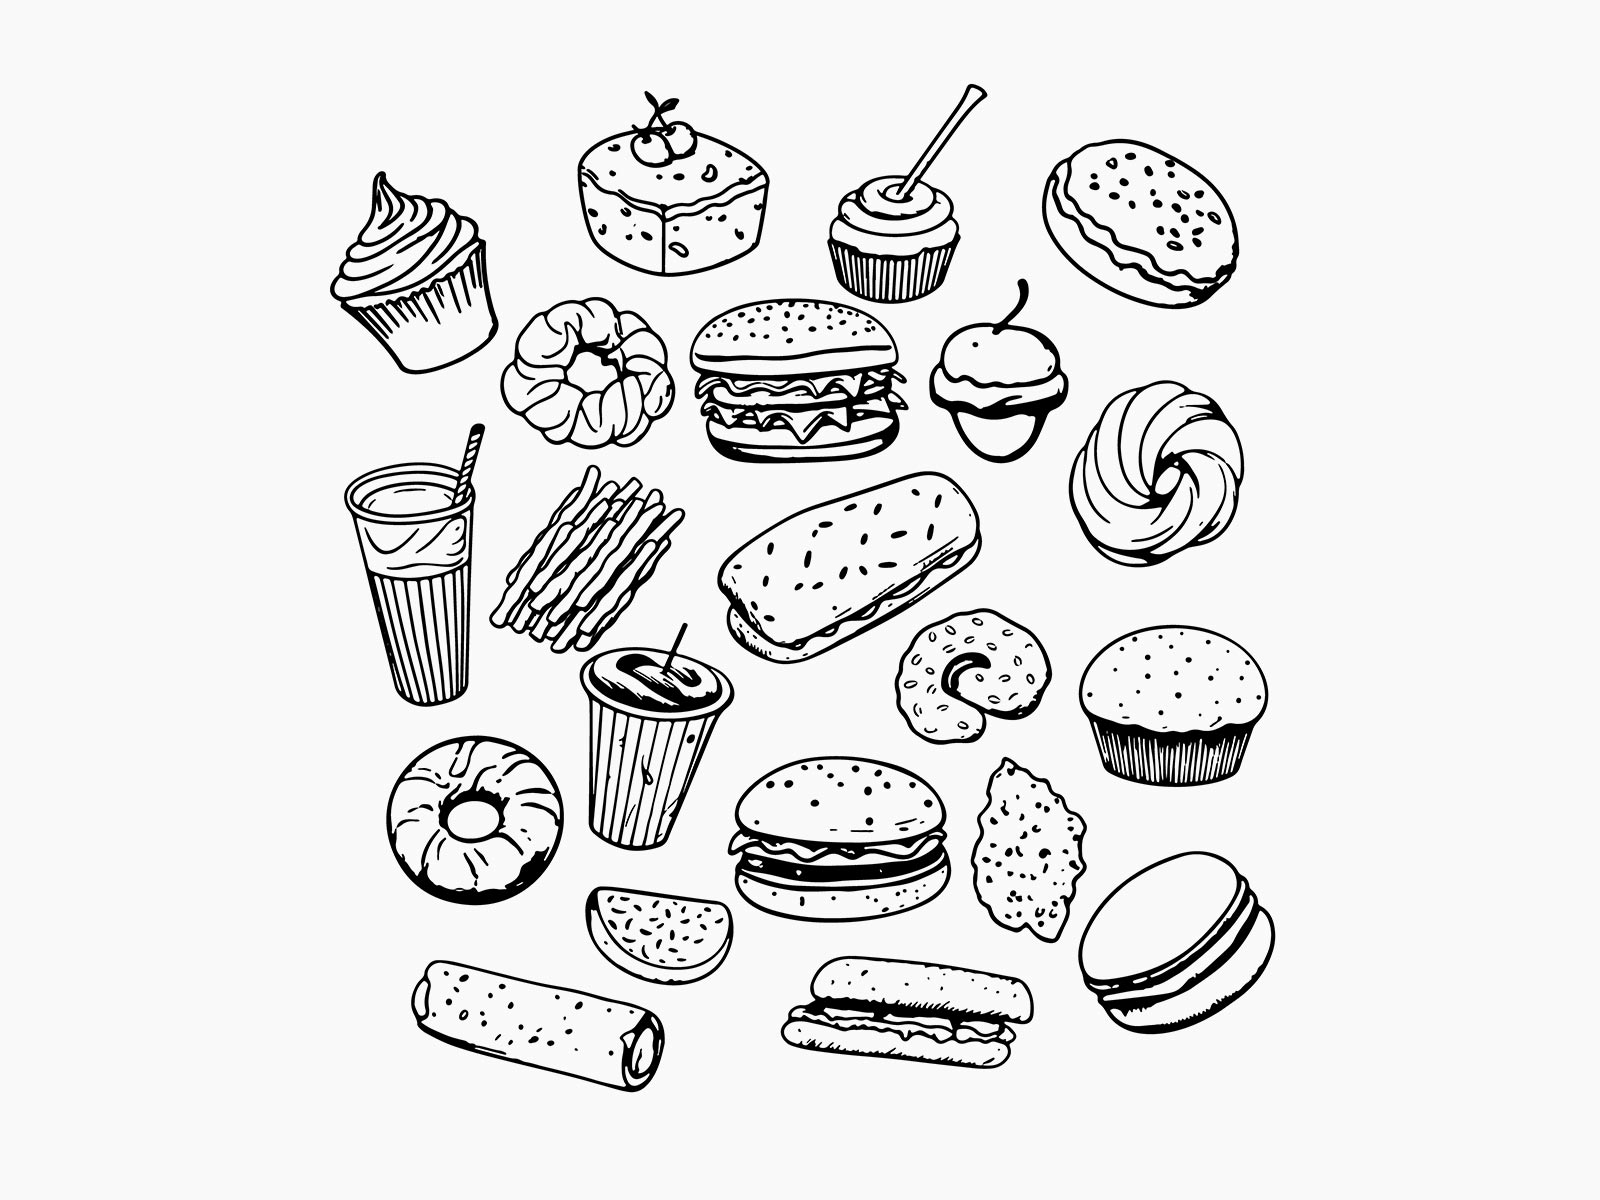 Bakery Items Vector Doodle Collection